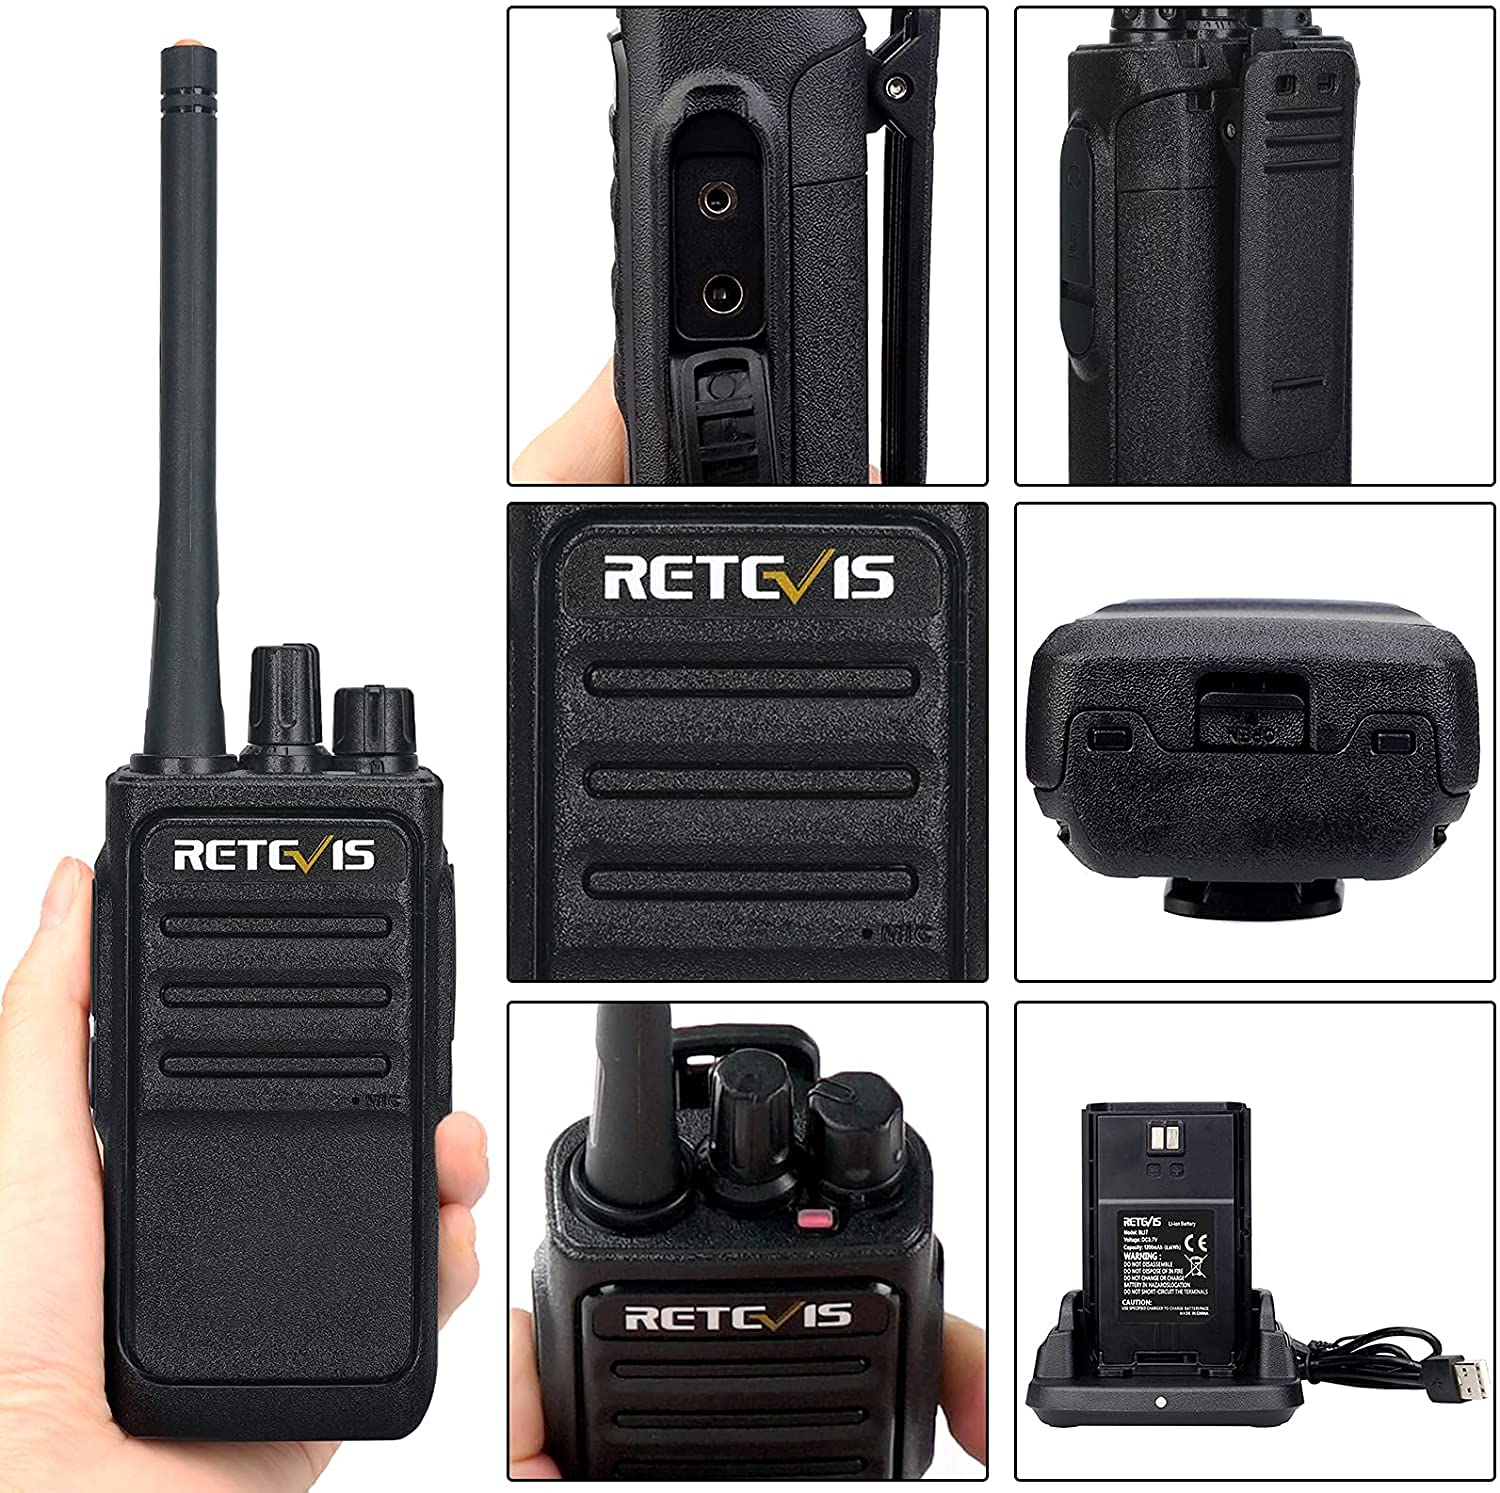 Retevis RT17 Walkie-Talkies for Adults Long Range,Portable 2 Way Radio with Earpiece and Mic,Rechargeable Two Way Radios with USB Charging Base, for Industrial Jobsite Restaurant Commercial(10 Pack)